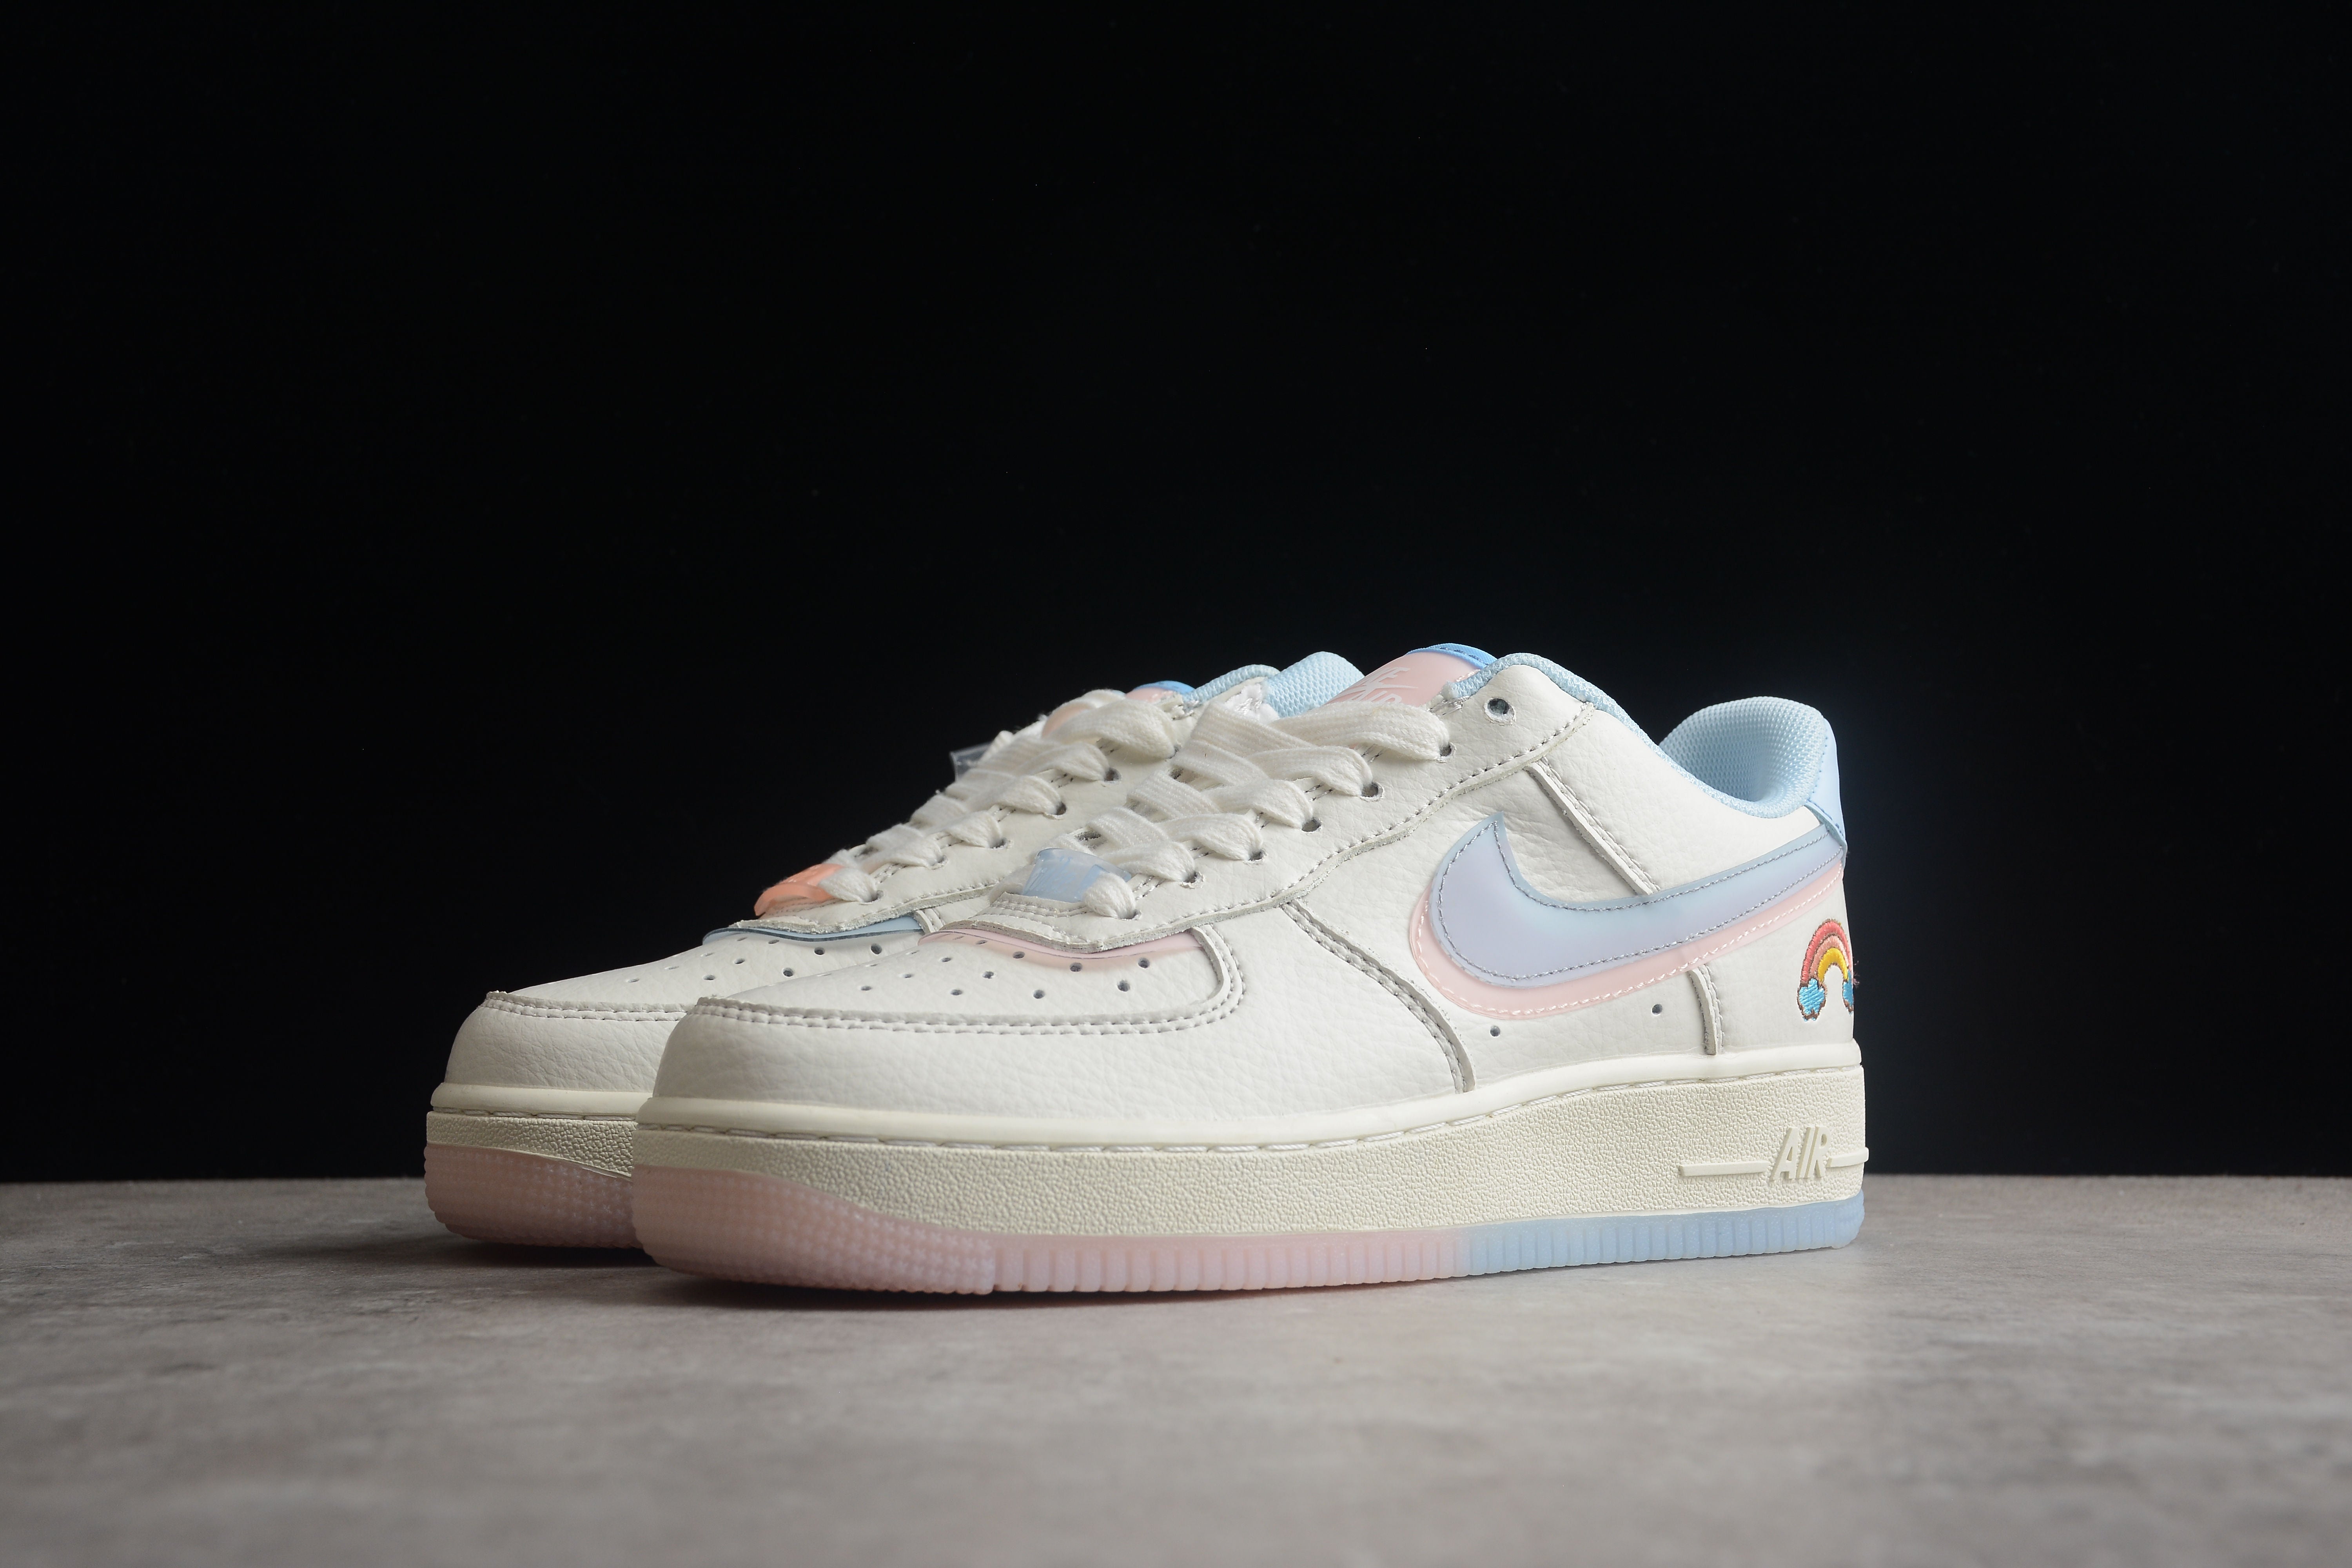 Nike airforce A1 rainbow shoes